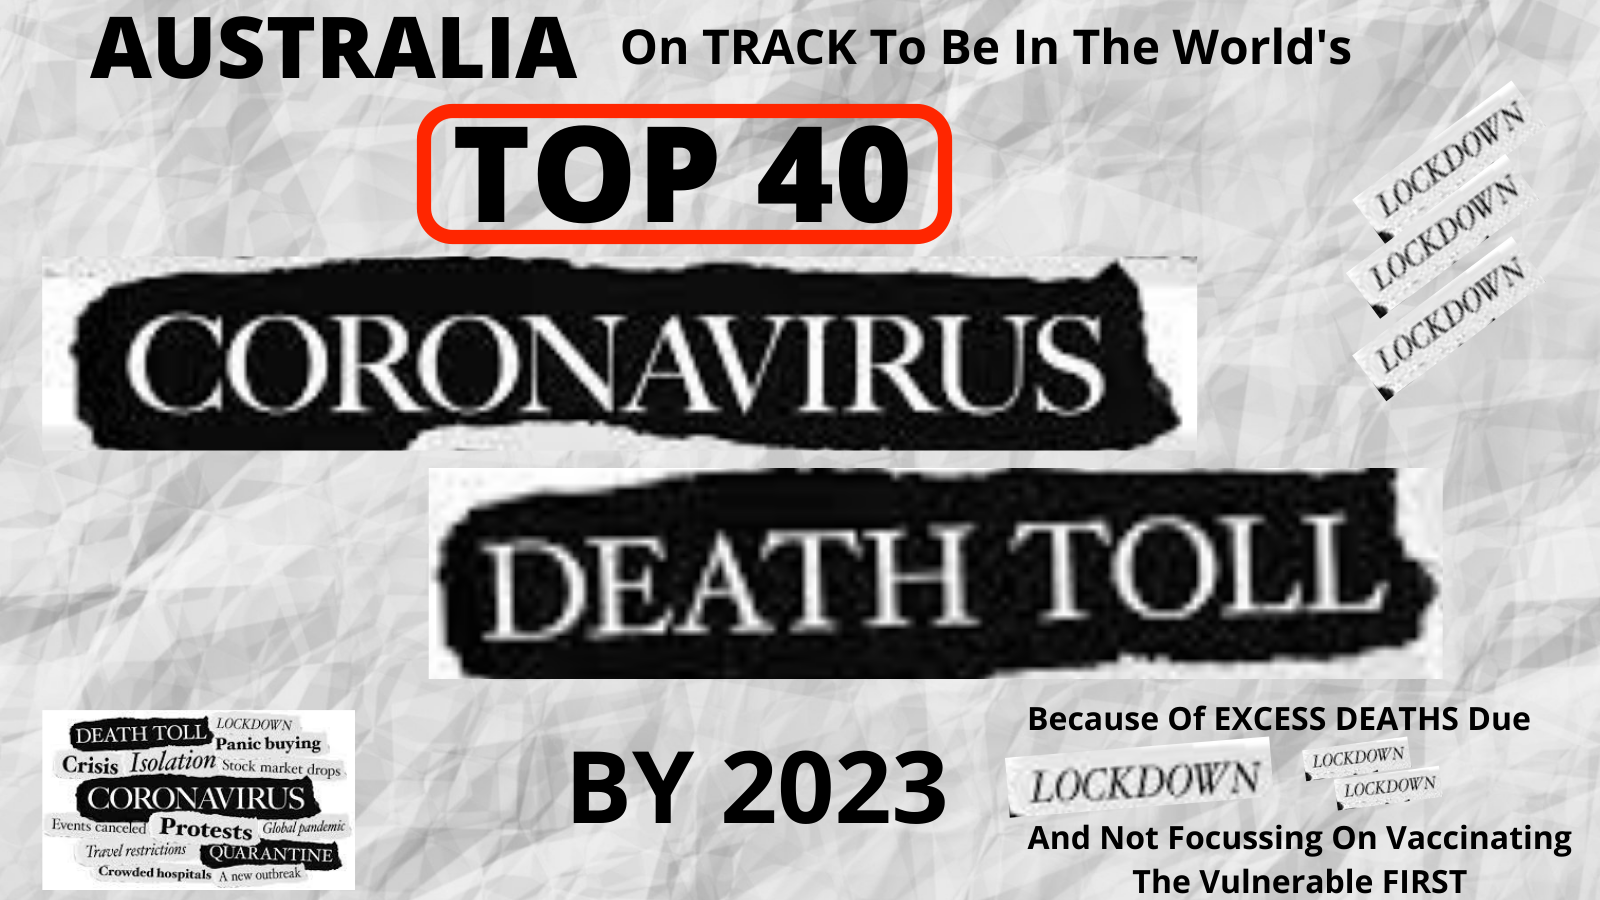 Australia On Covid Track?  Yes – To Have A Top 40 Worst Death Toll By 2023